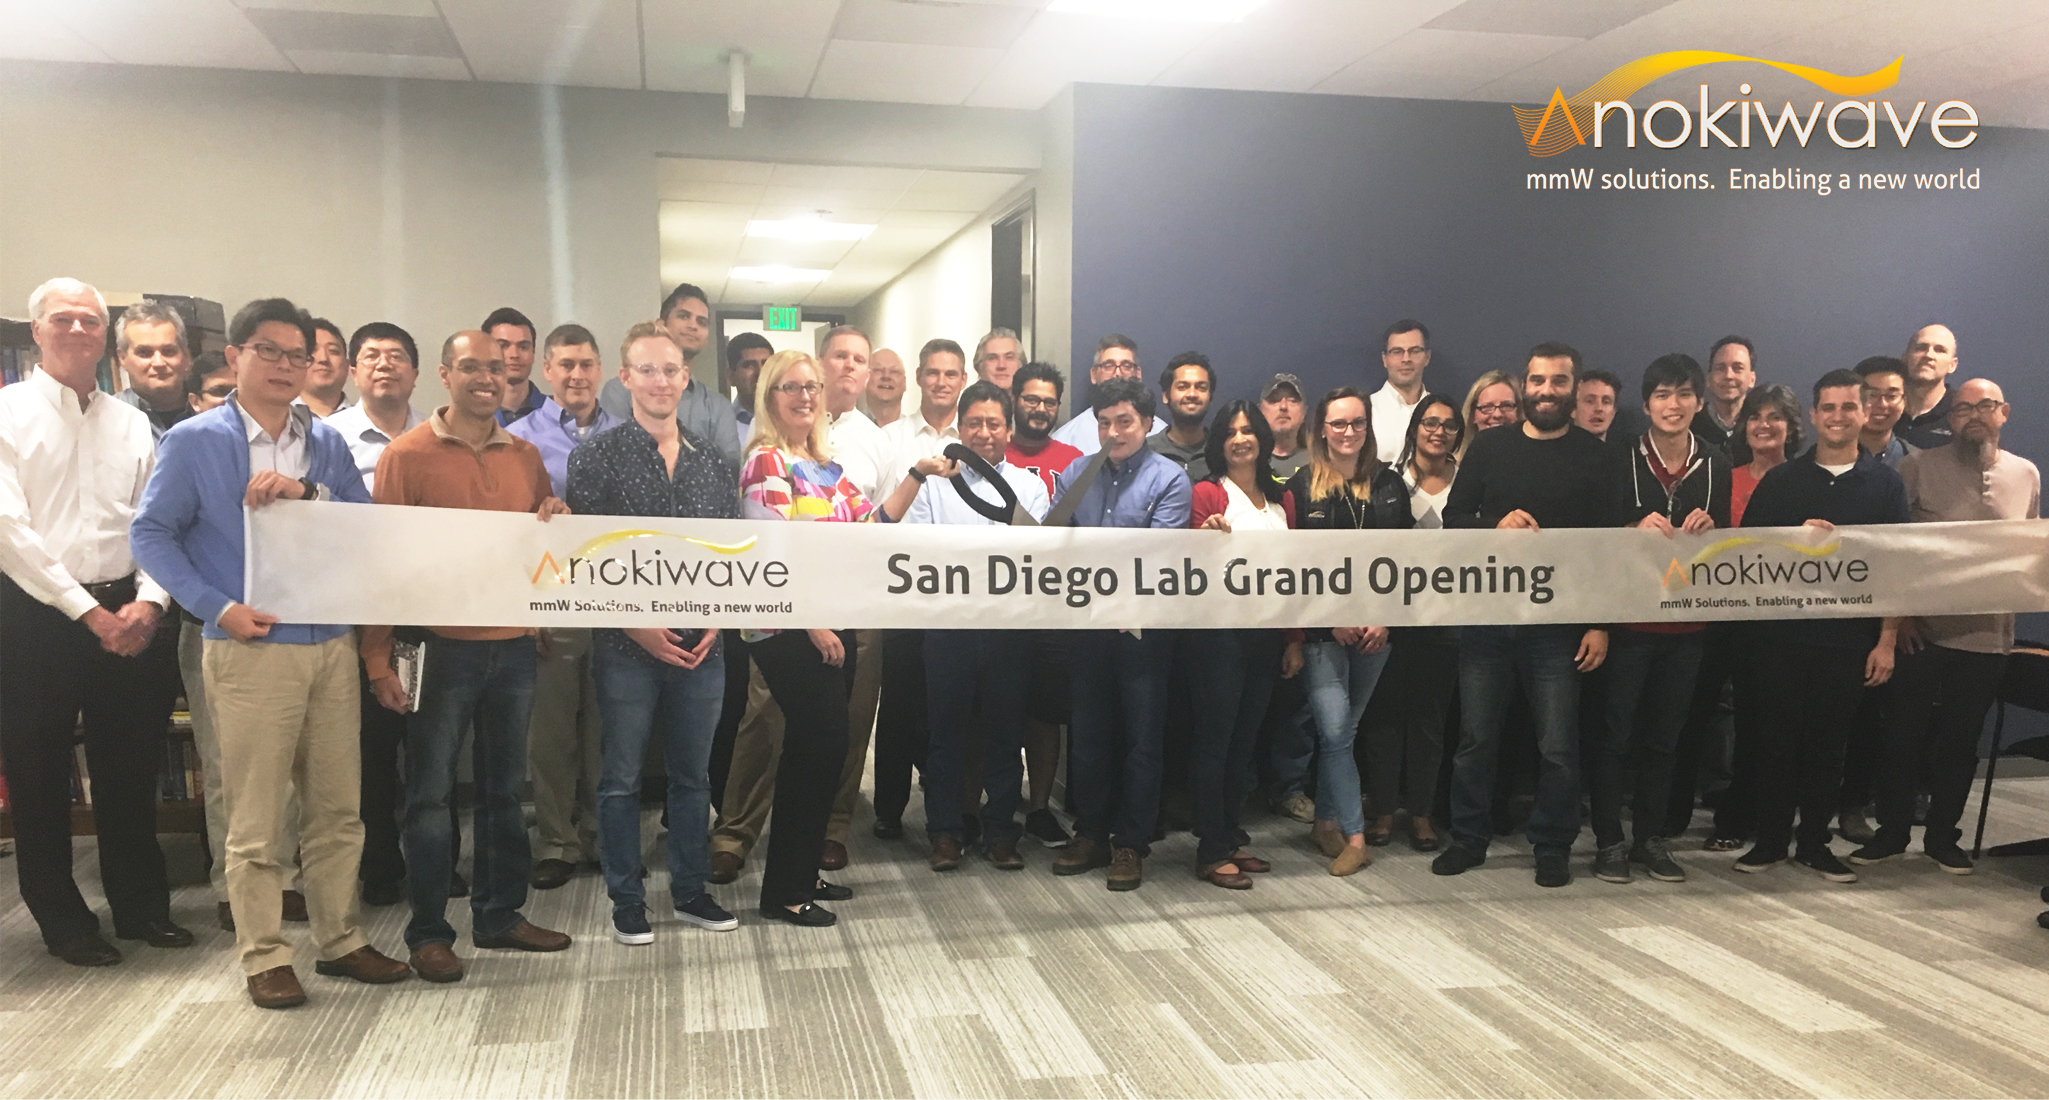 Anokiwave founders Nitin and Deepti Jain celebrate the opening of the mmW Test Laboratory